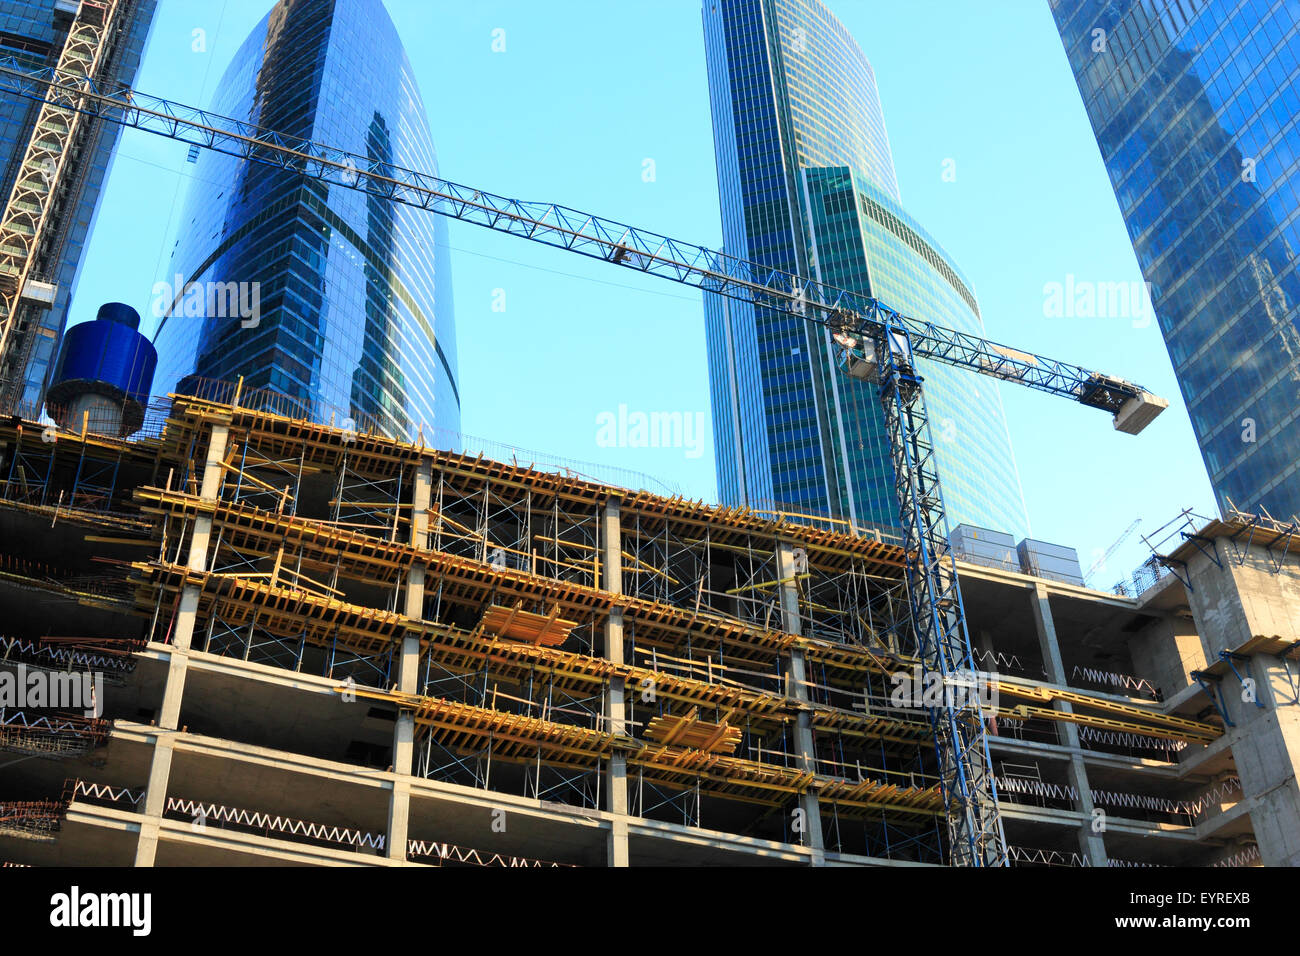 Formwork systems in use at a building site. Stock Photo